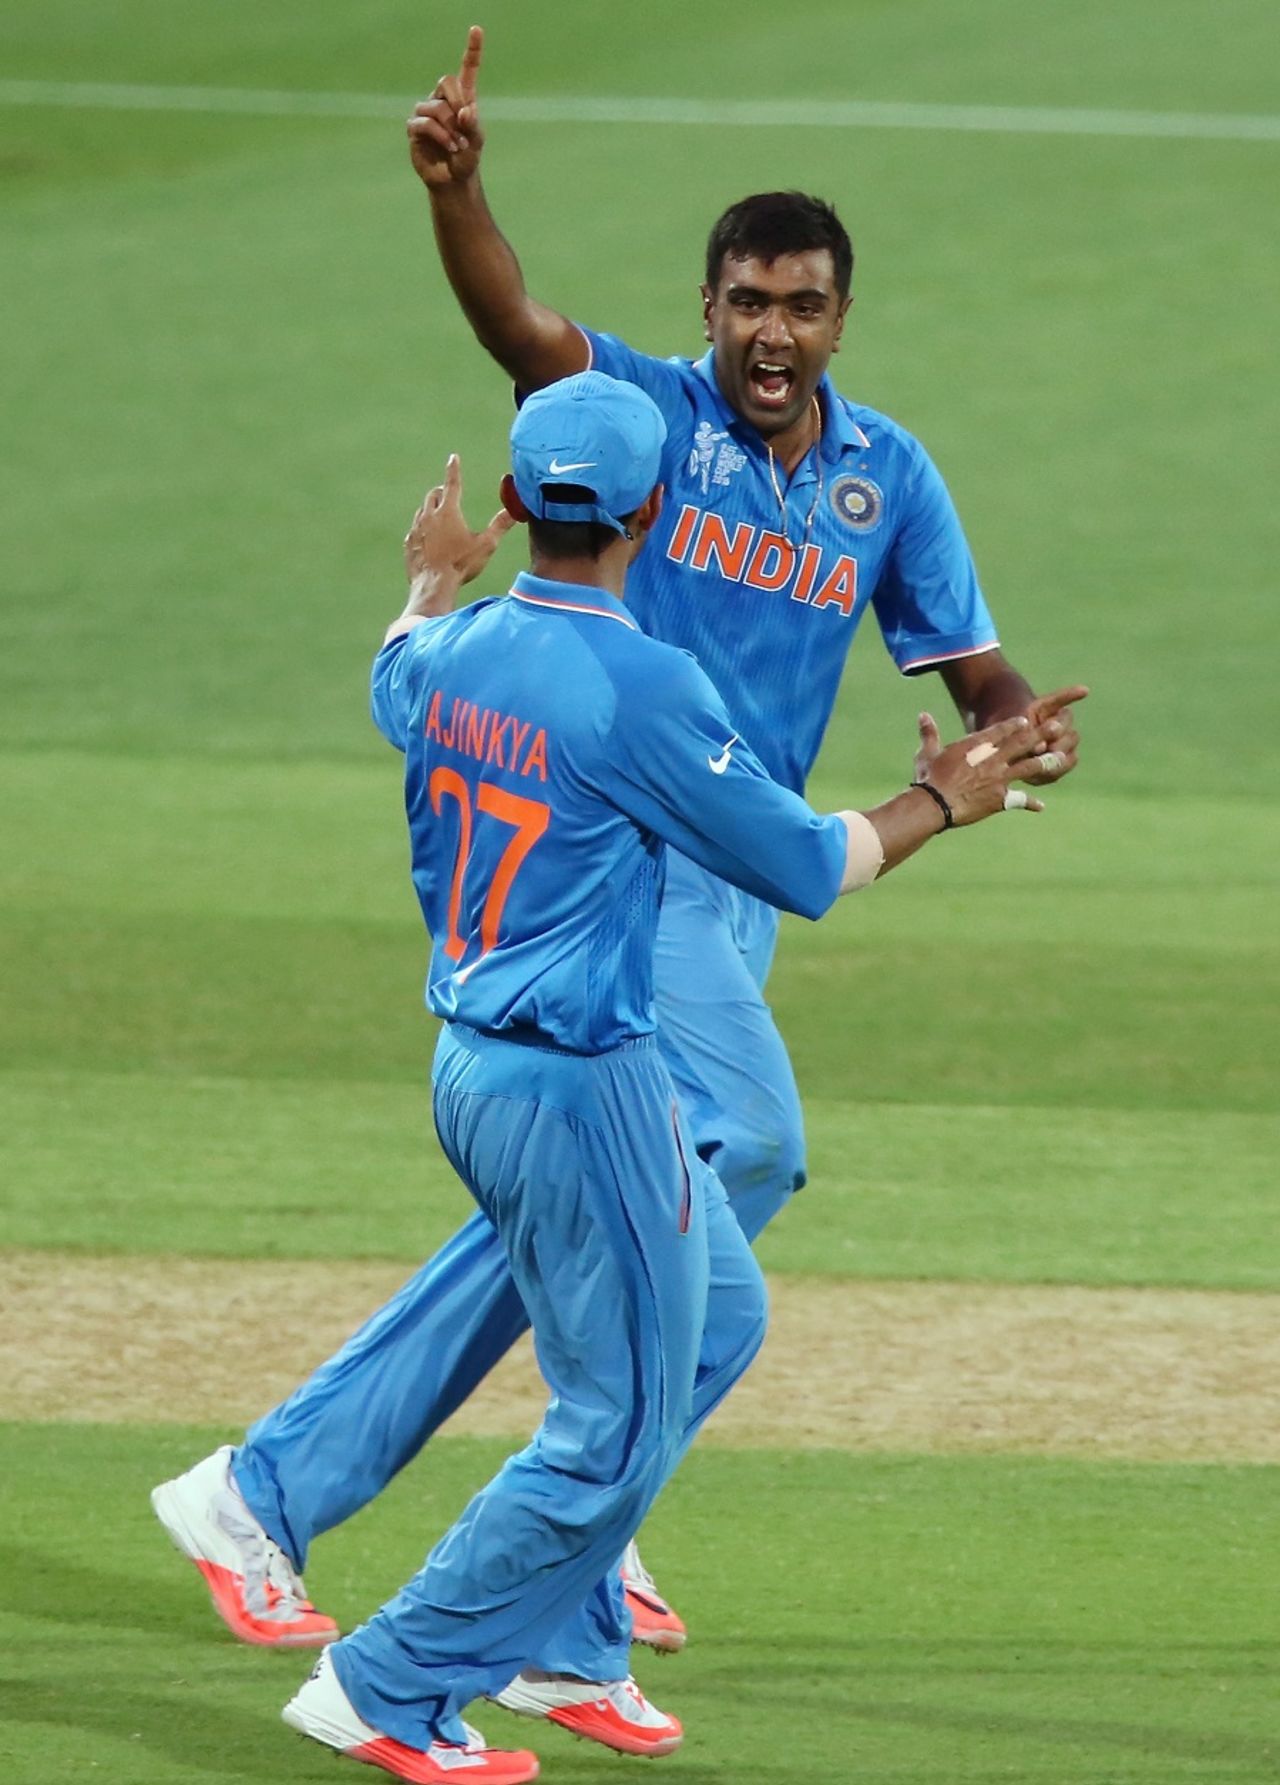 R Ashwin strangled Pakistan in the middle overs, India v Pakistan, World Cup 2015, Group B, Adelaide, February 15, 2015